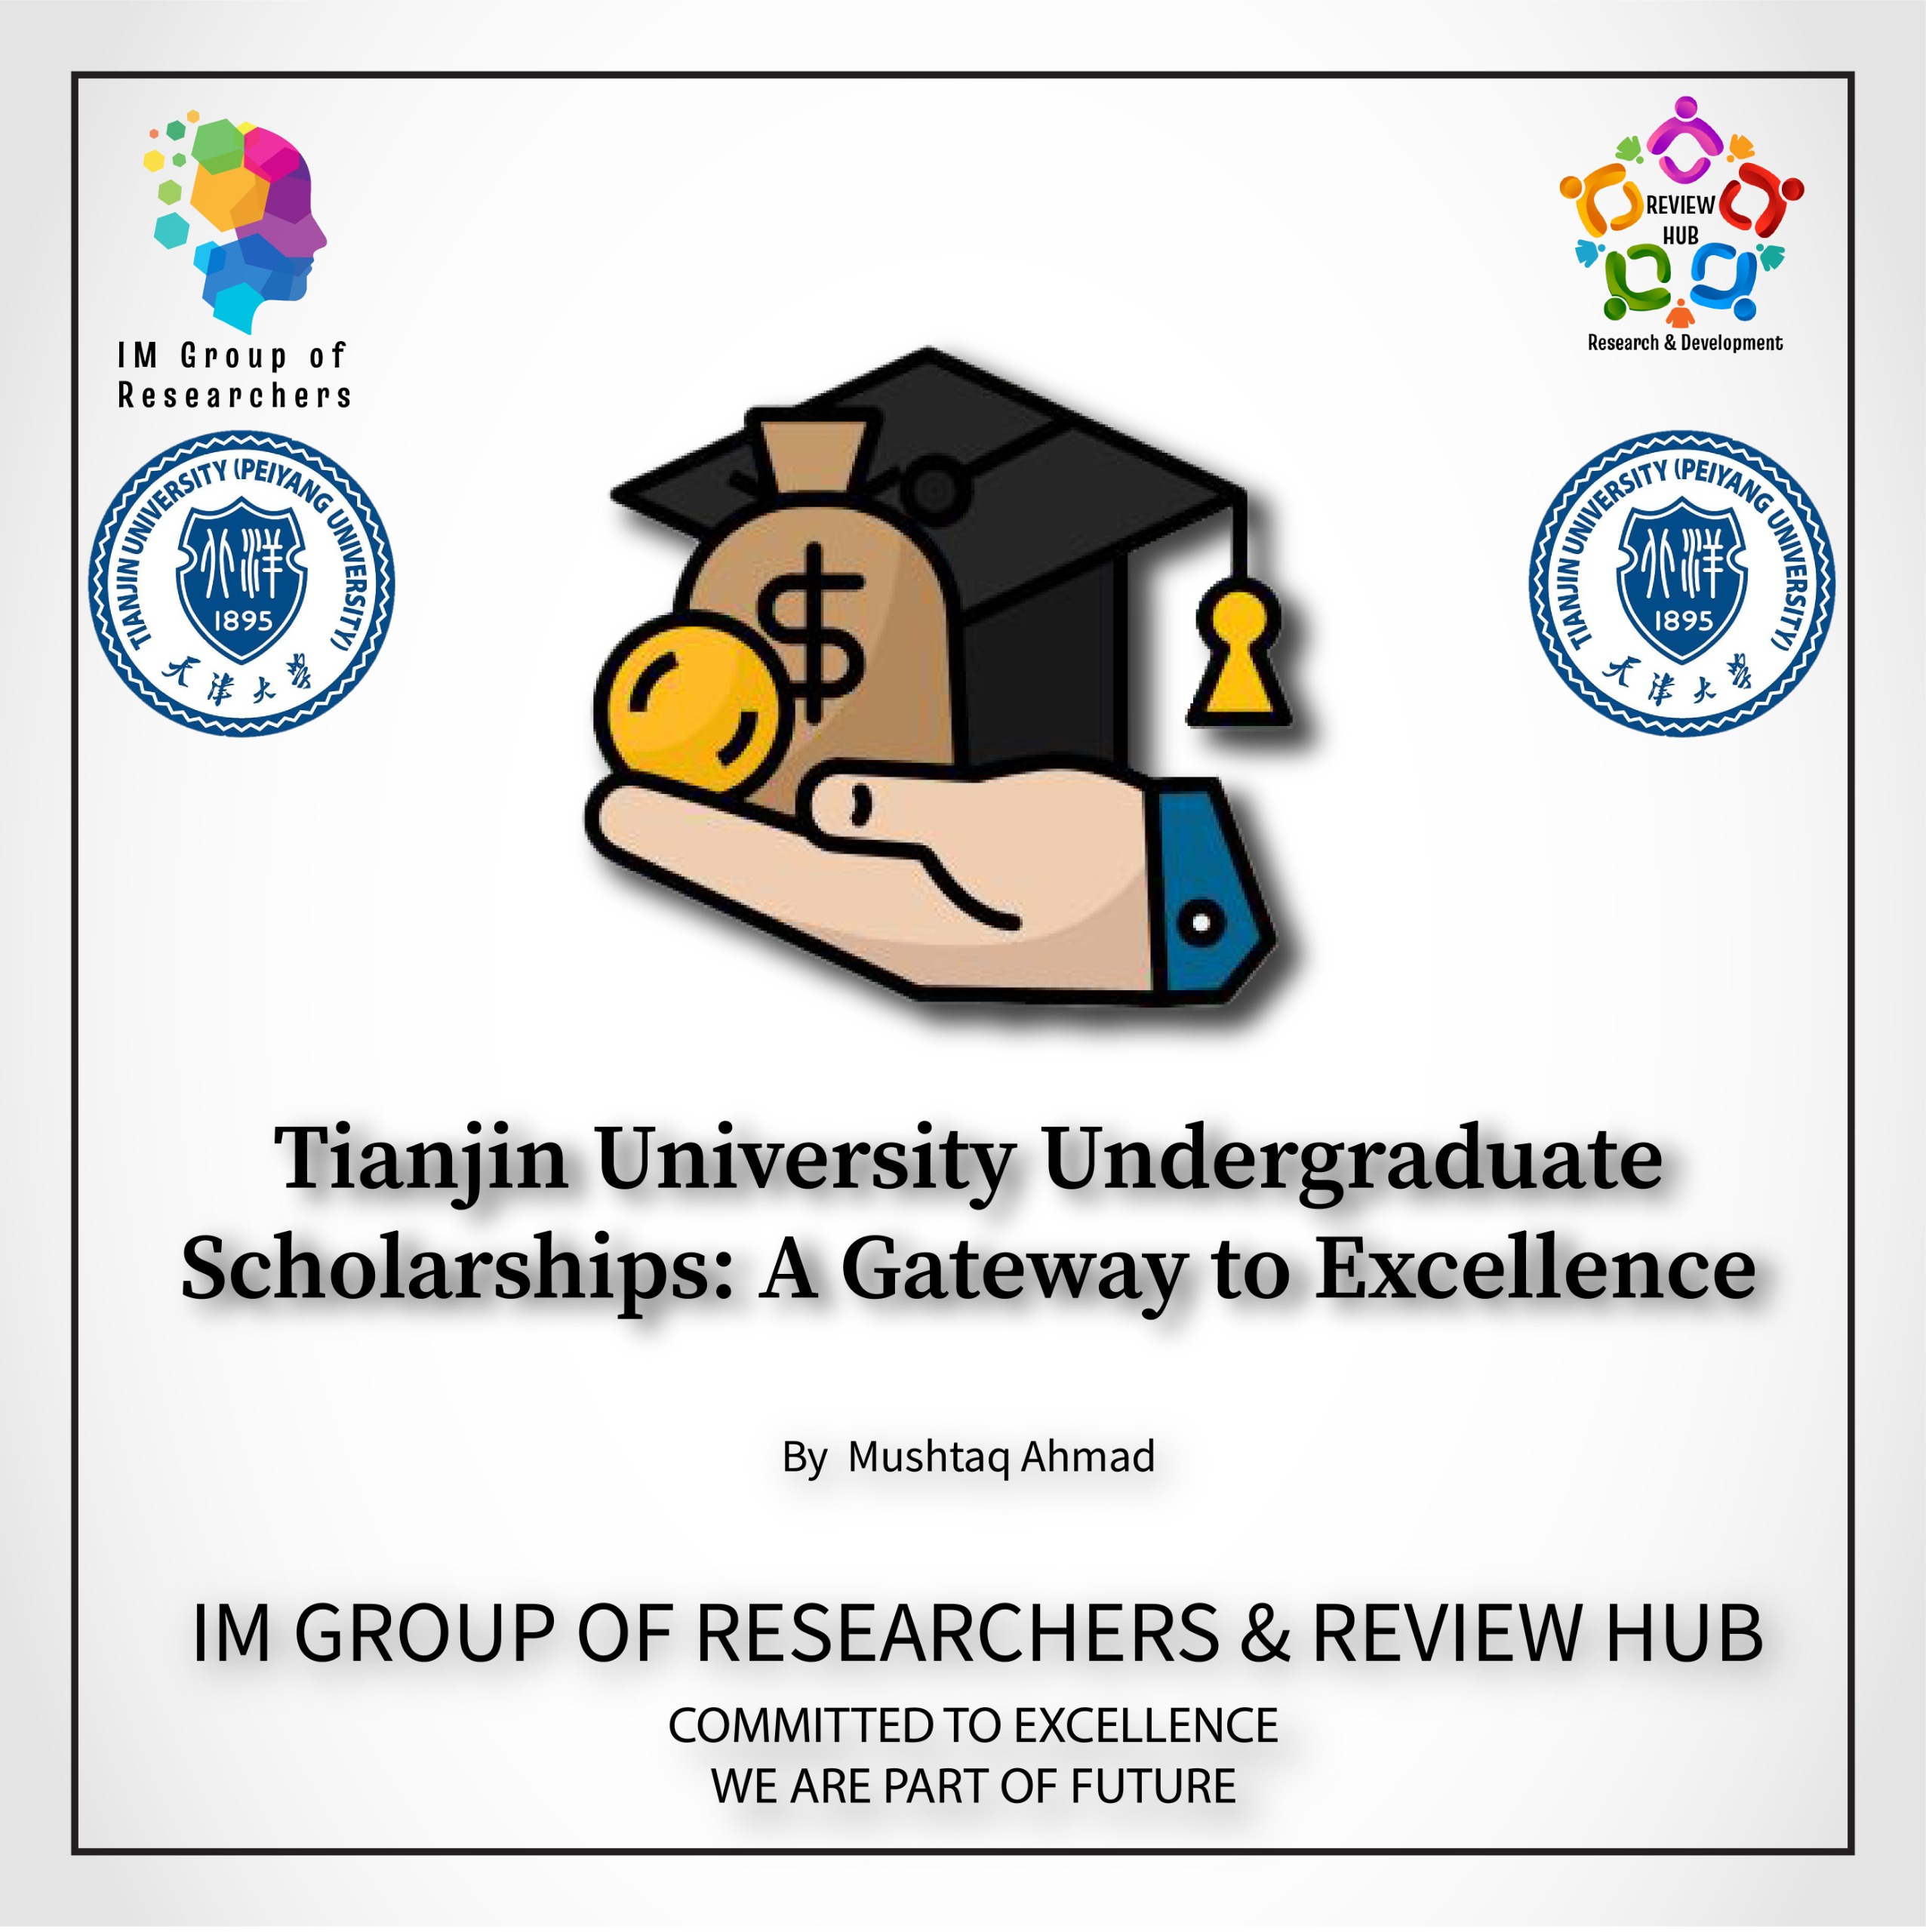 Tianjin University Undergraduate Scholarships: A Gateway to Excellence